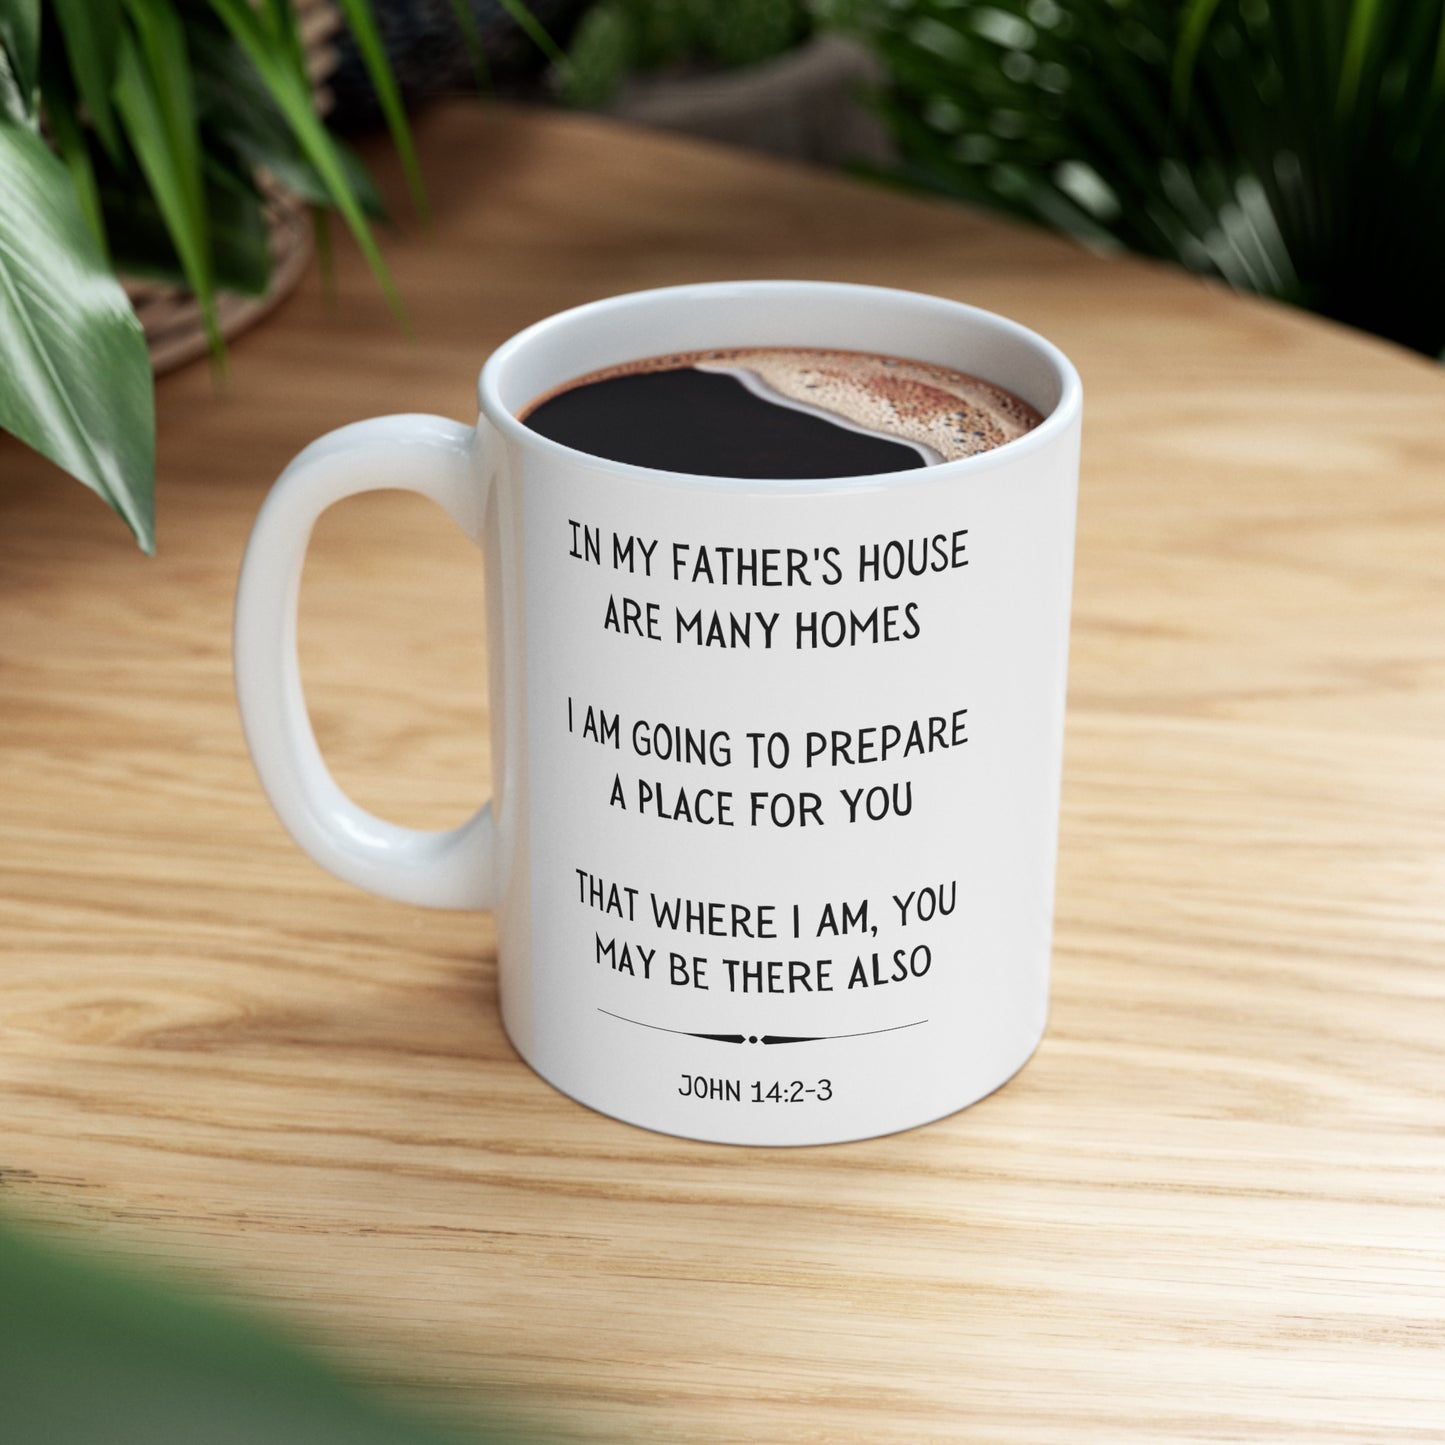 Scripture Mug, In My Fathers House are Many Homes, John 14:2-3